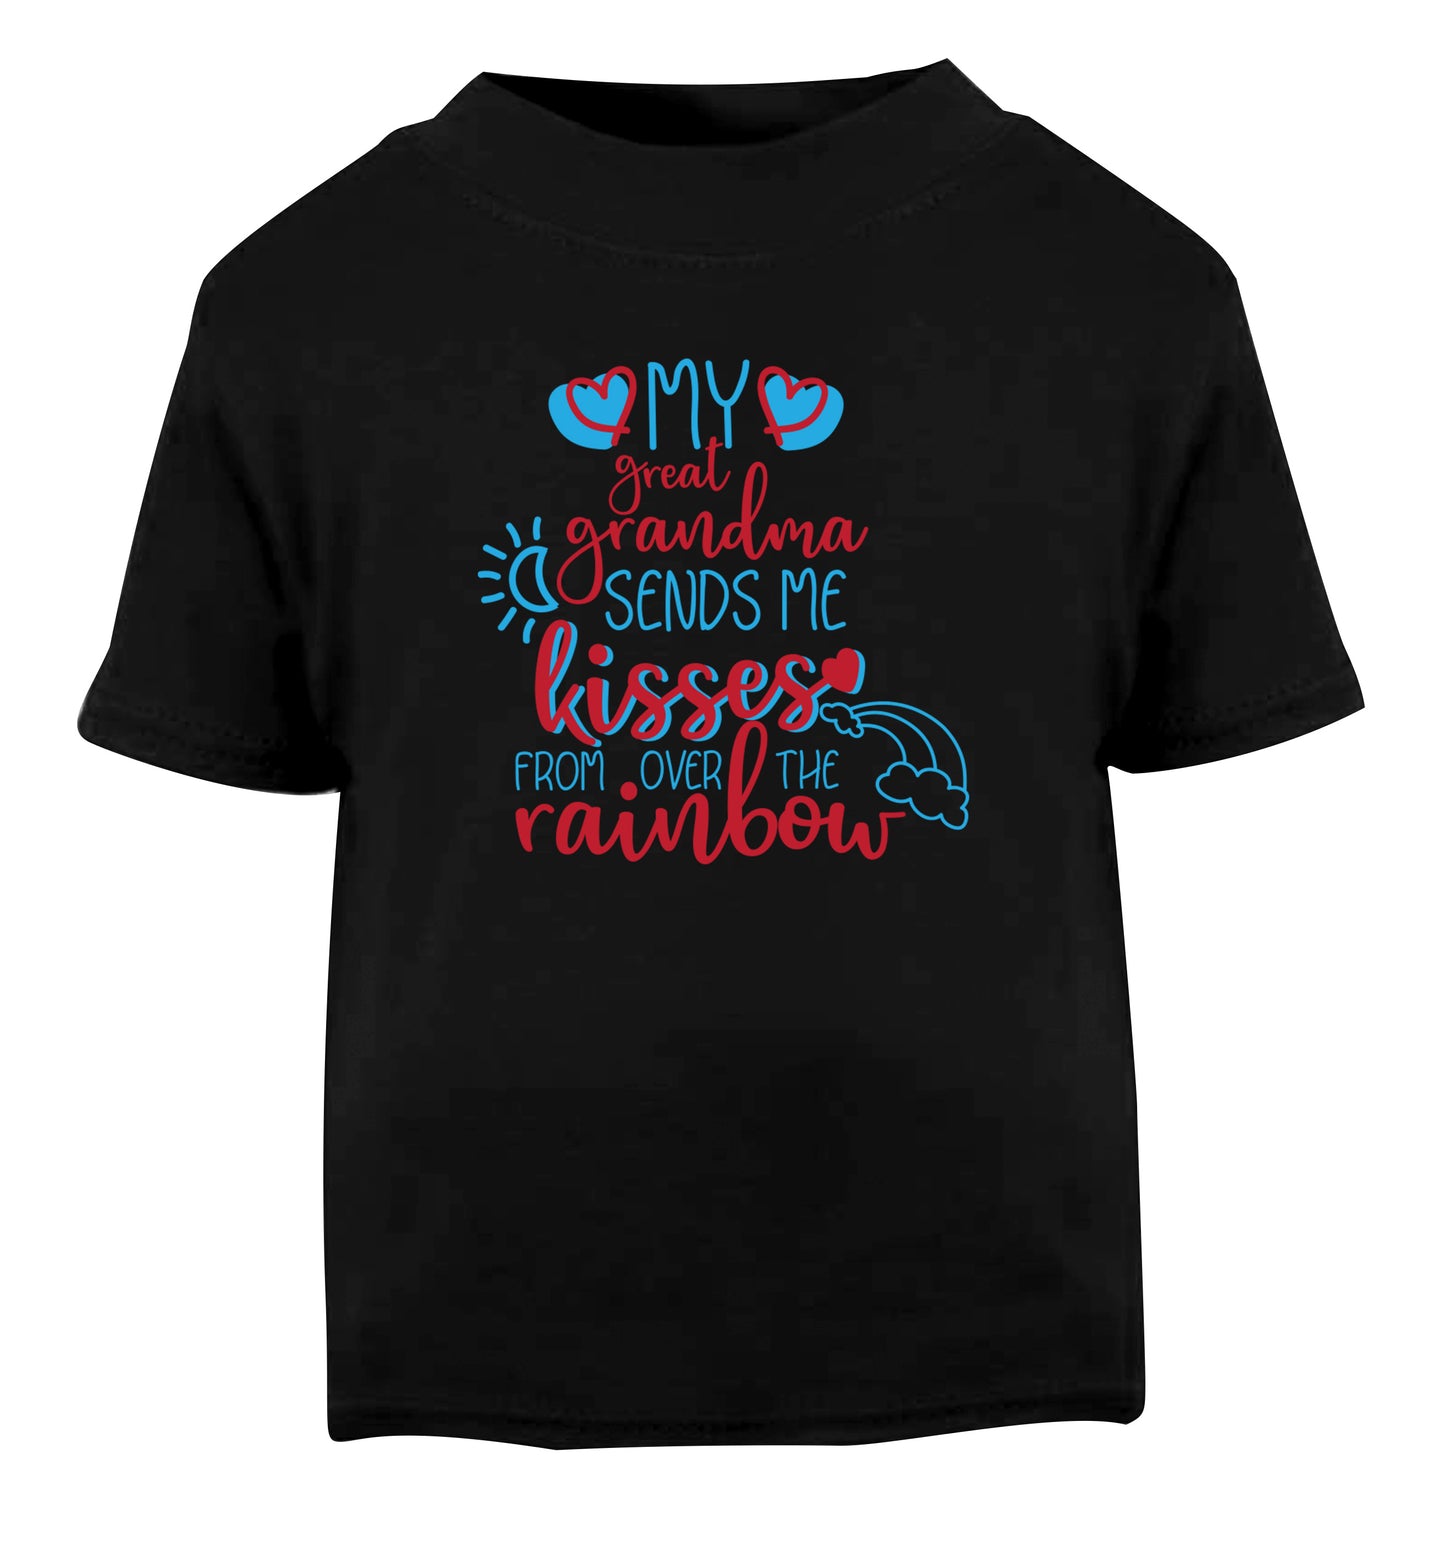 My great grandma sends me kisses from over the rainbow Black Baby Toddler Tshirt 2 years